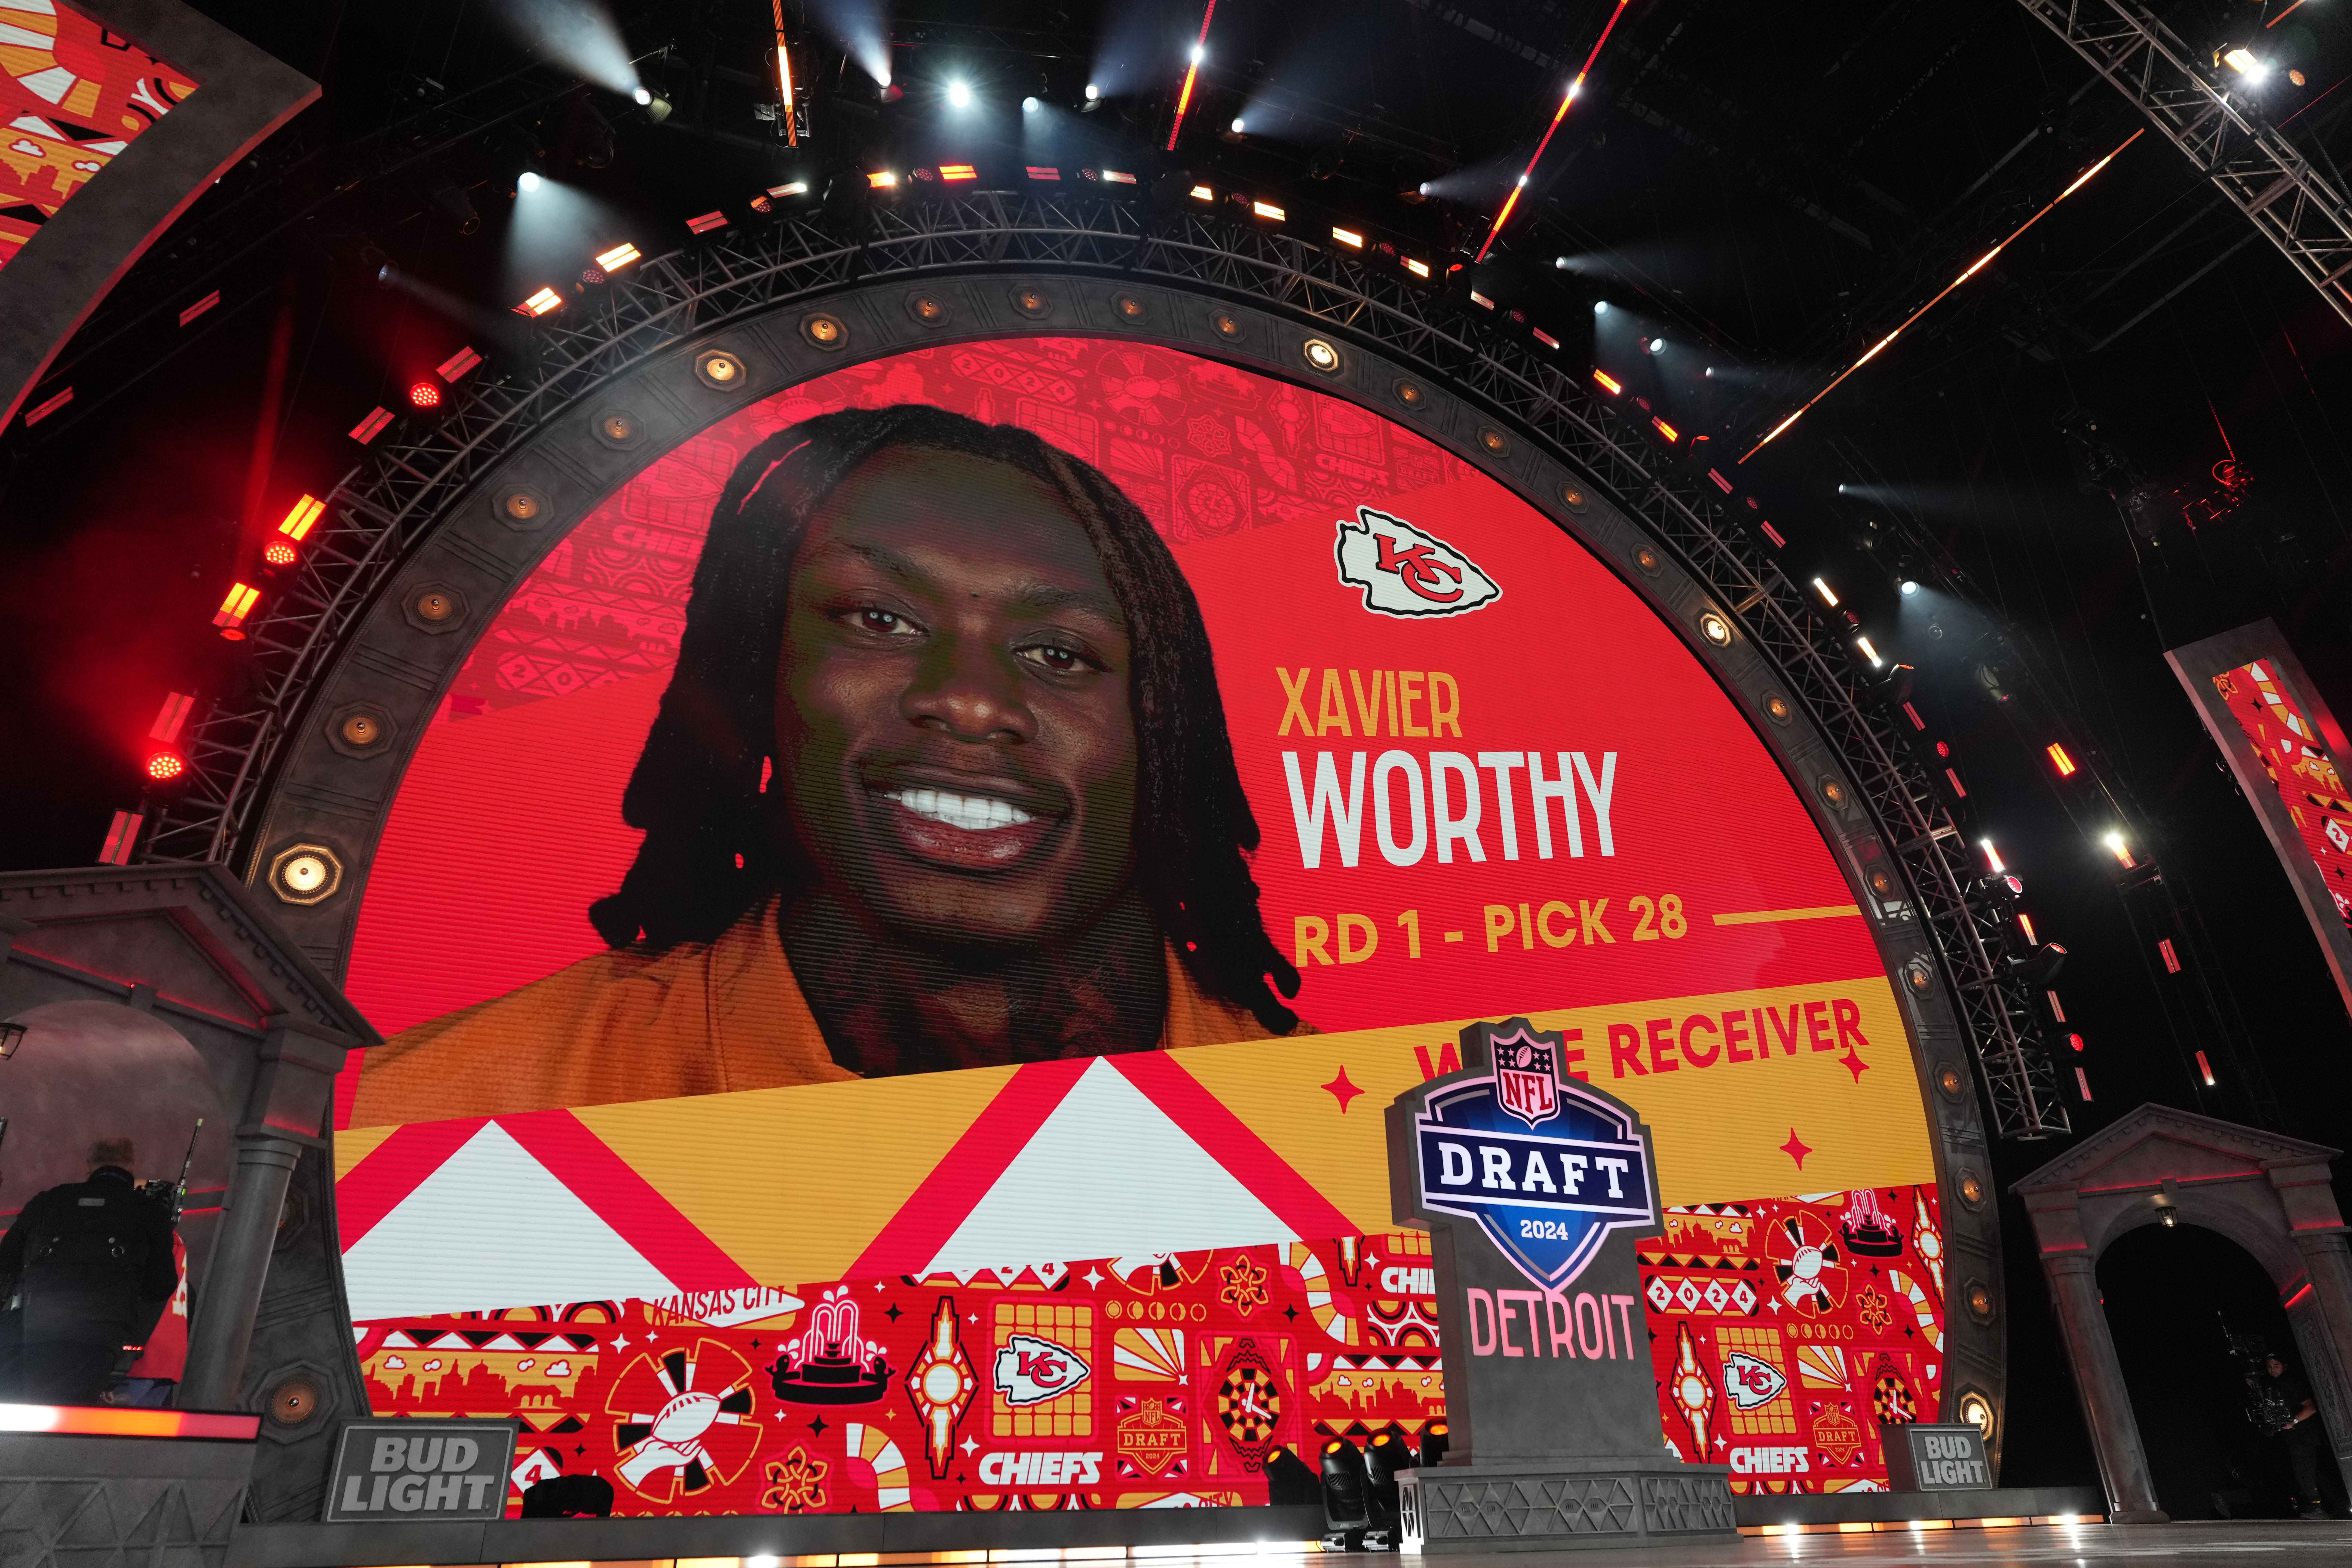 After getting drafted, Texas' NFL rookies are assigned their new jersey numbers